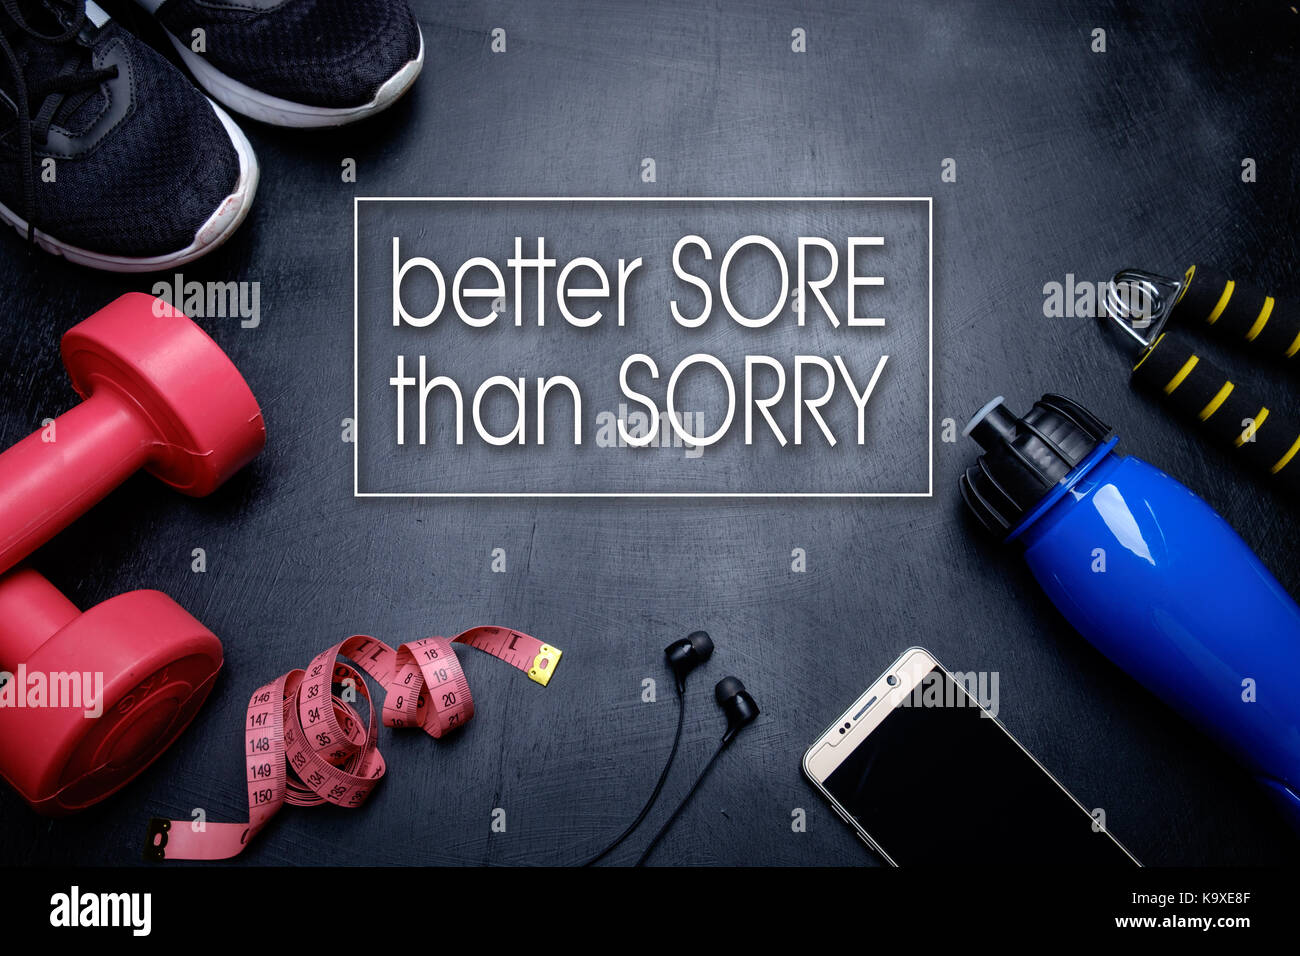 Better sore than sorry. Health Fitness motivational quotes. Stock Photo